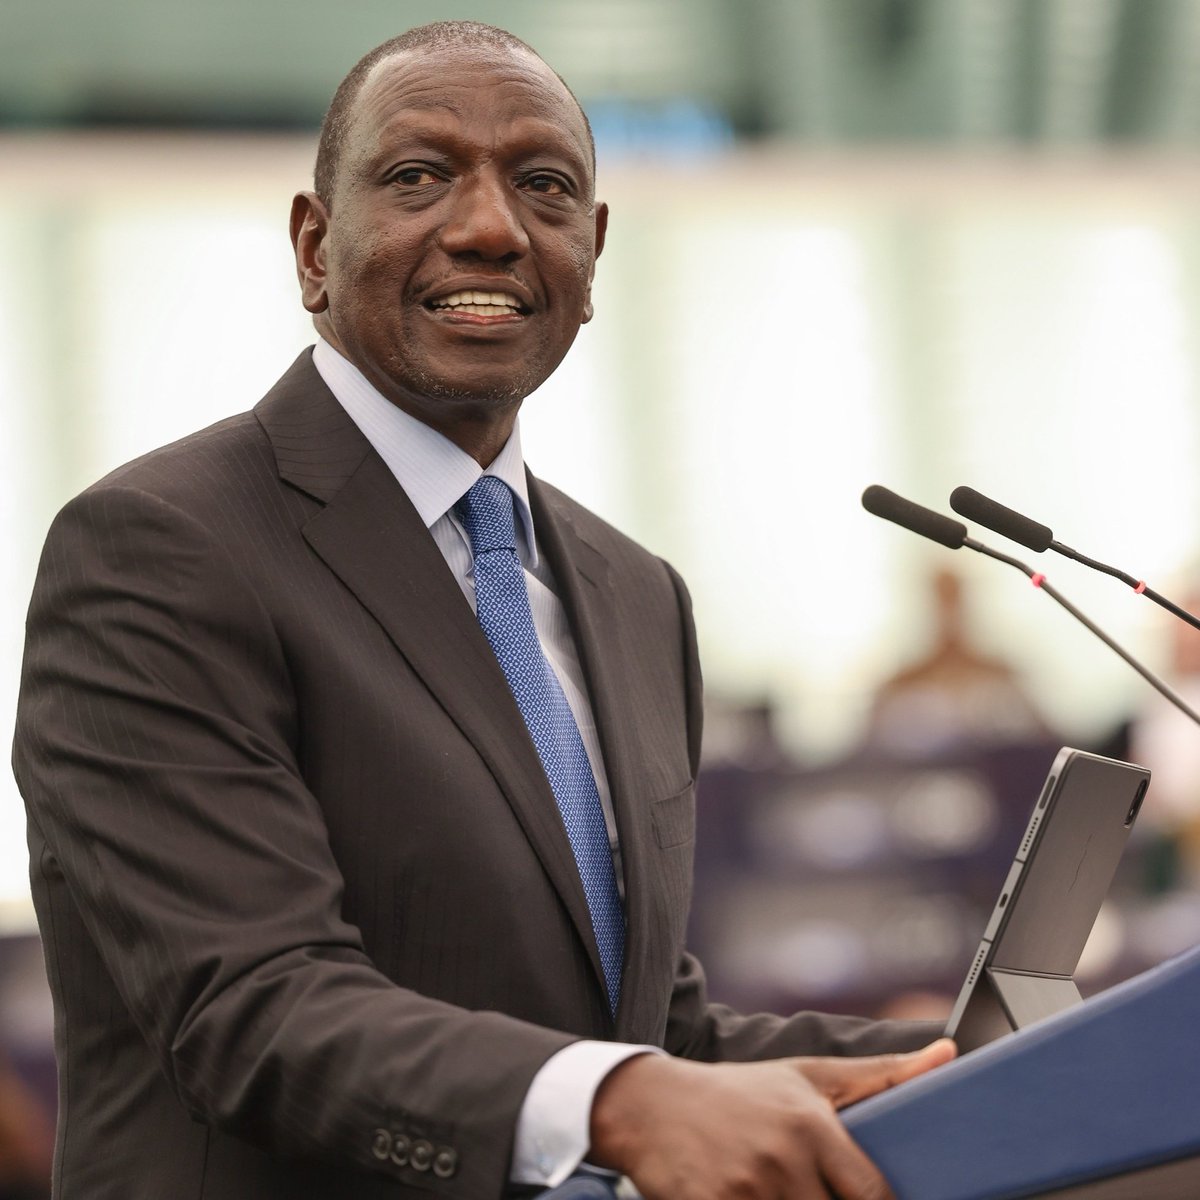 President @WilliamsRuto has called for stronger cooperation between the European Union (EU) and African countries, especially in matters climate change and industrialisation. He was speaking in Strasbourg France in a session with the EU Parliament. @StateHouseKenya